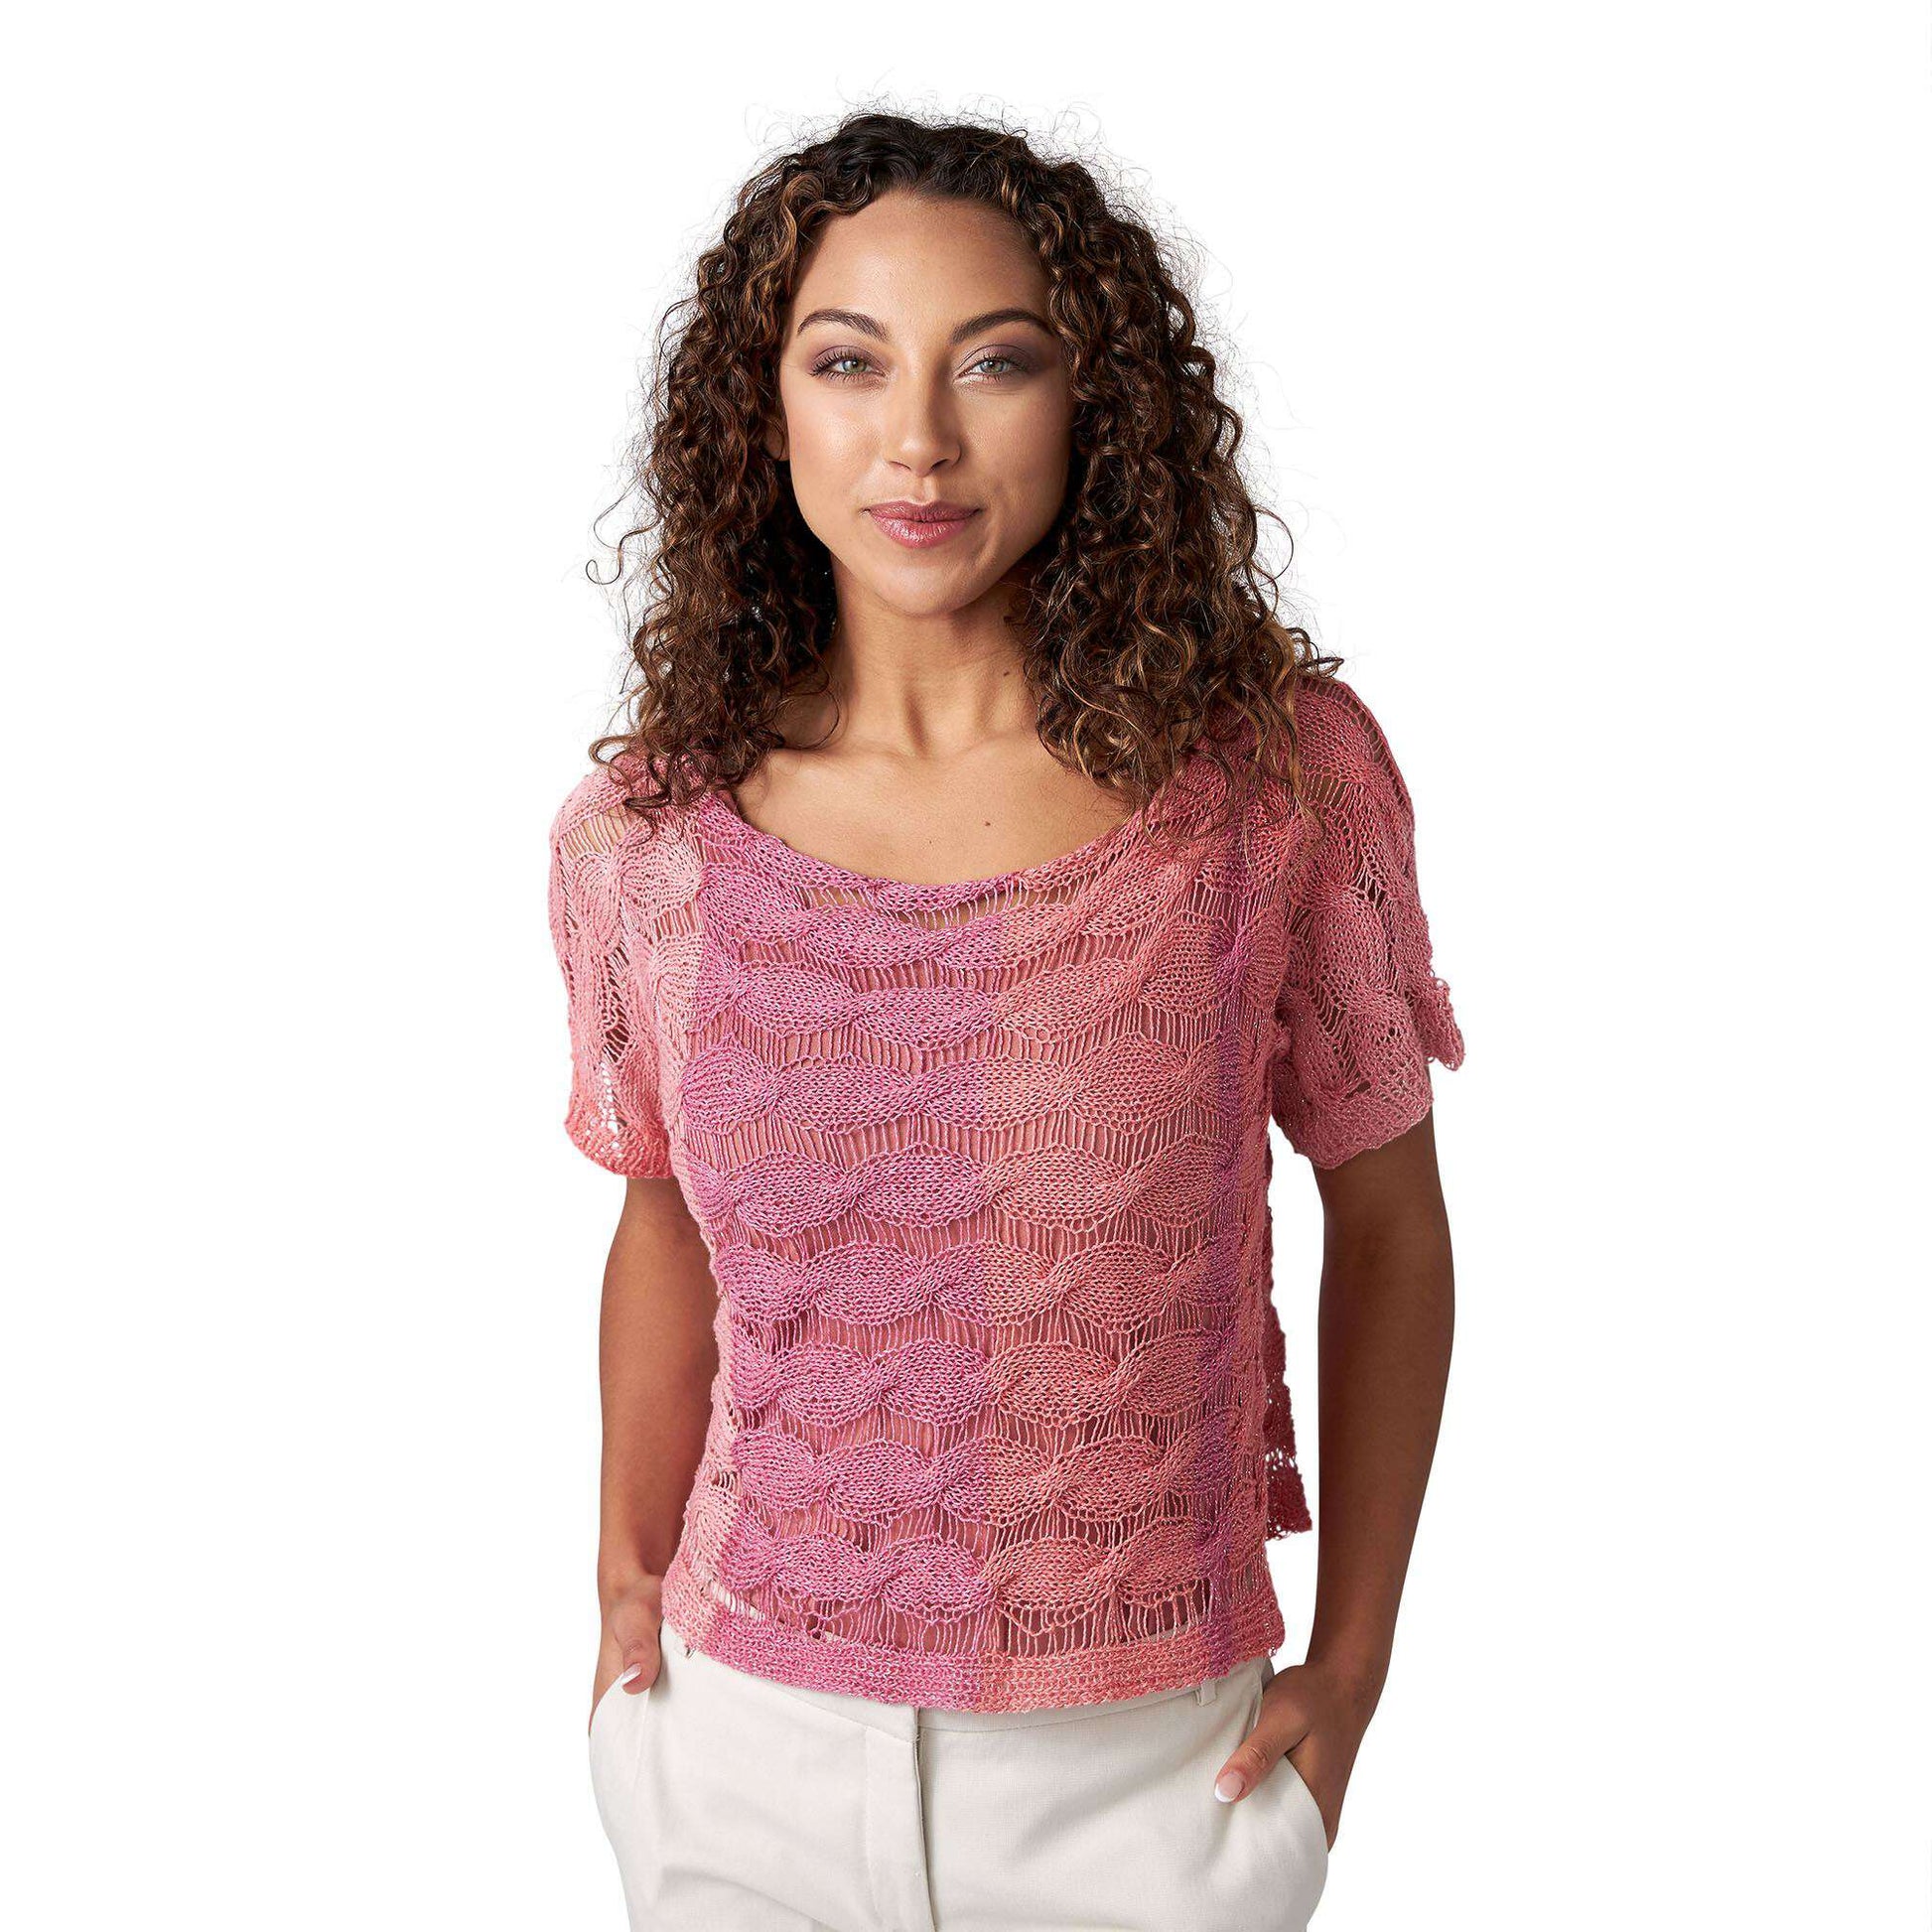 Free Red Heart Breezy Cabled Knit Top Pattern